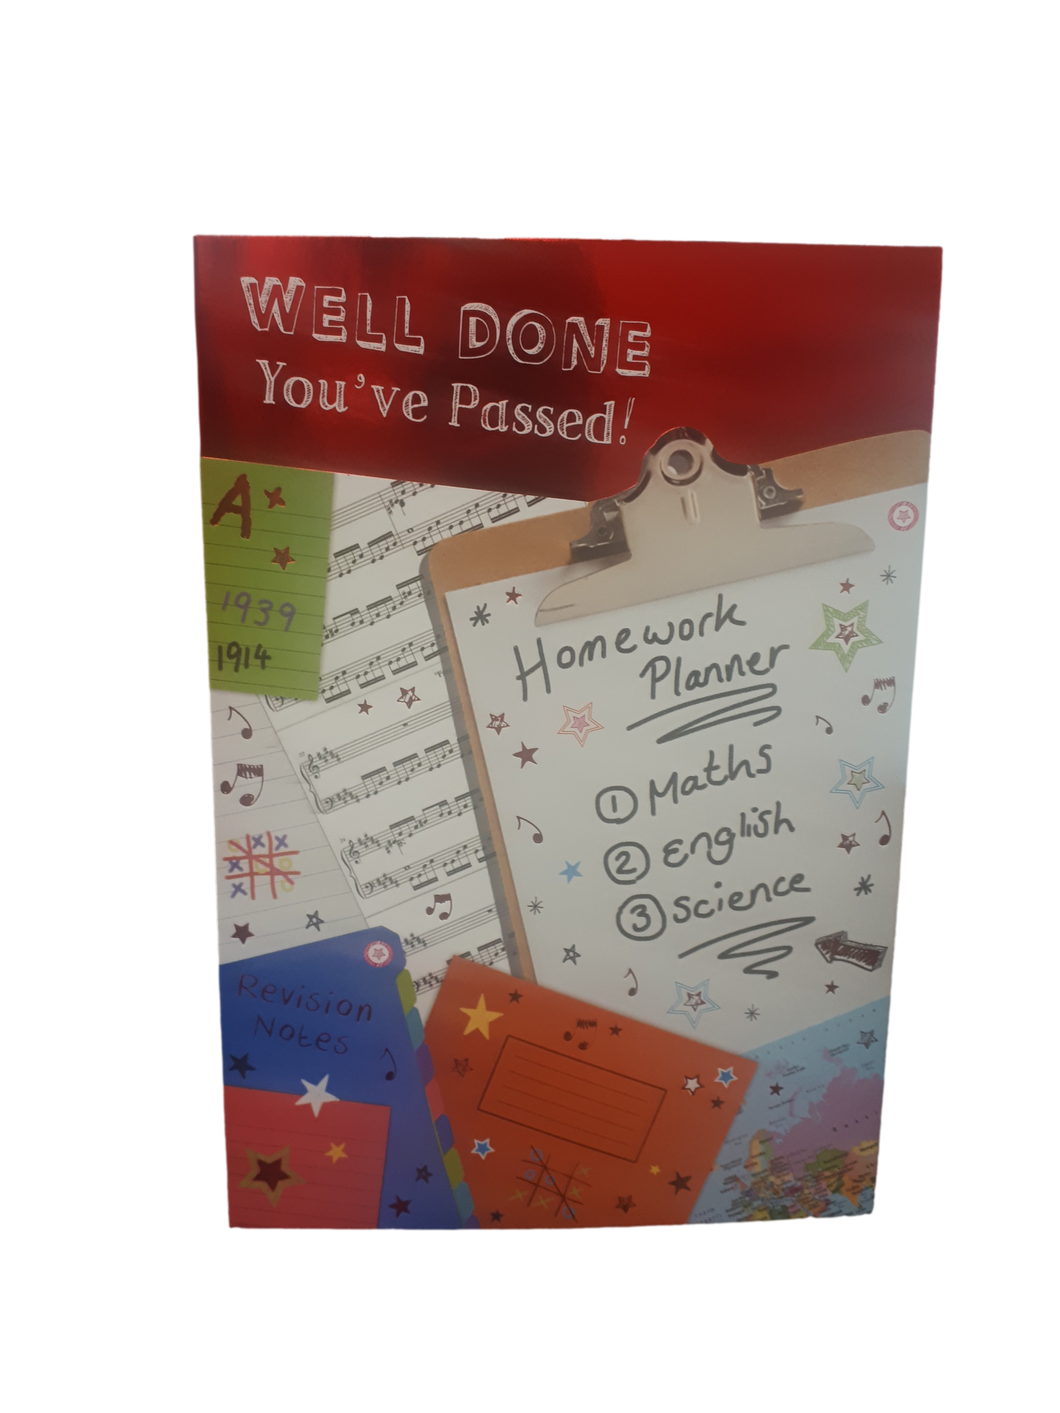 Well Done - Exam Results - Maths / English / Science - Greeting Card - Free Postage